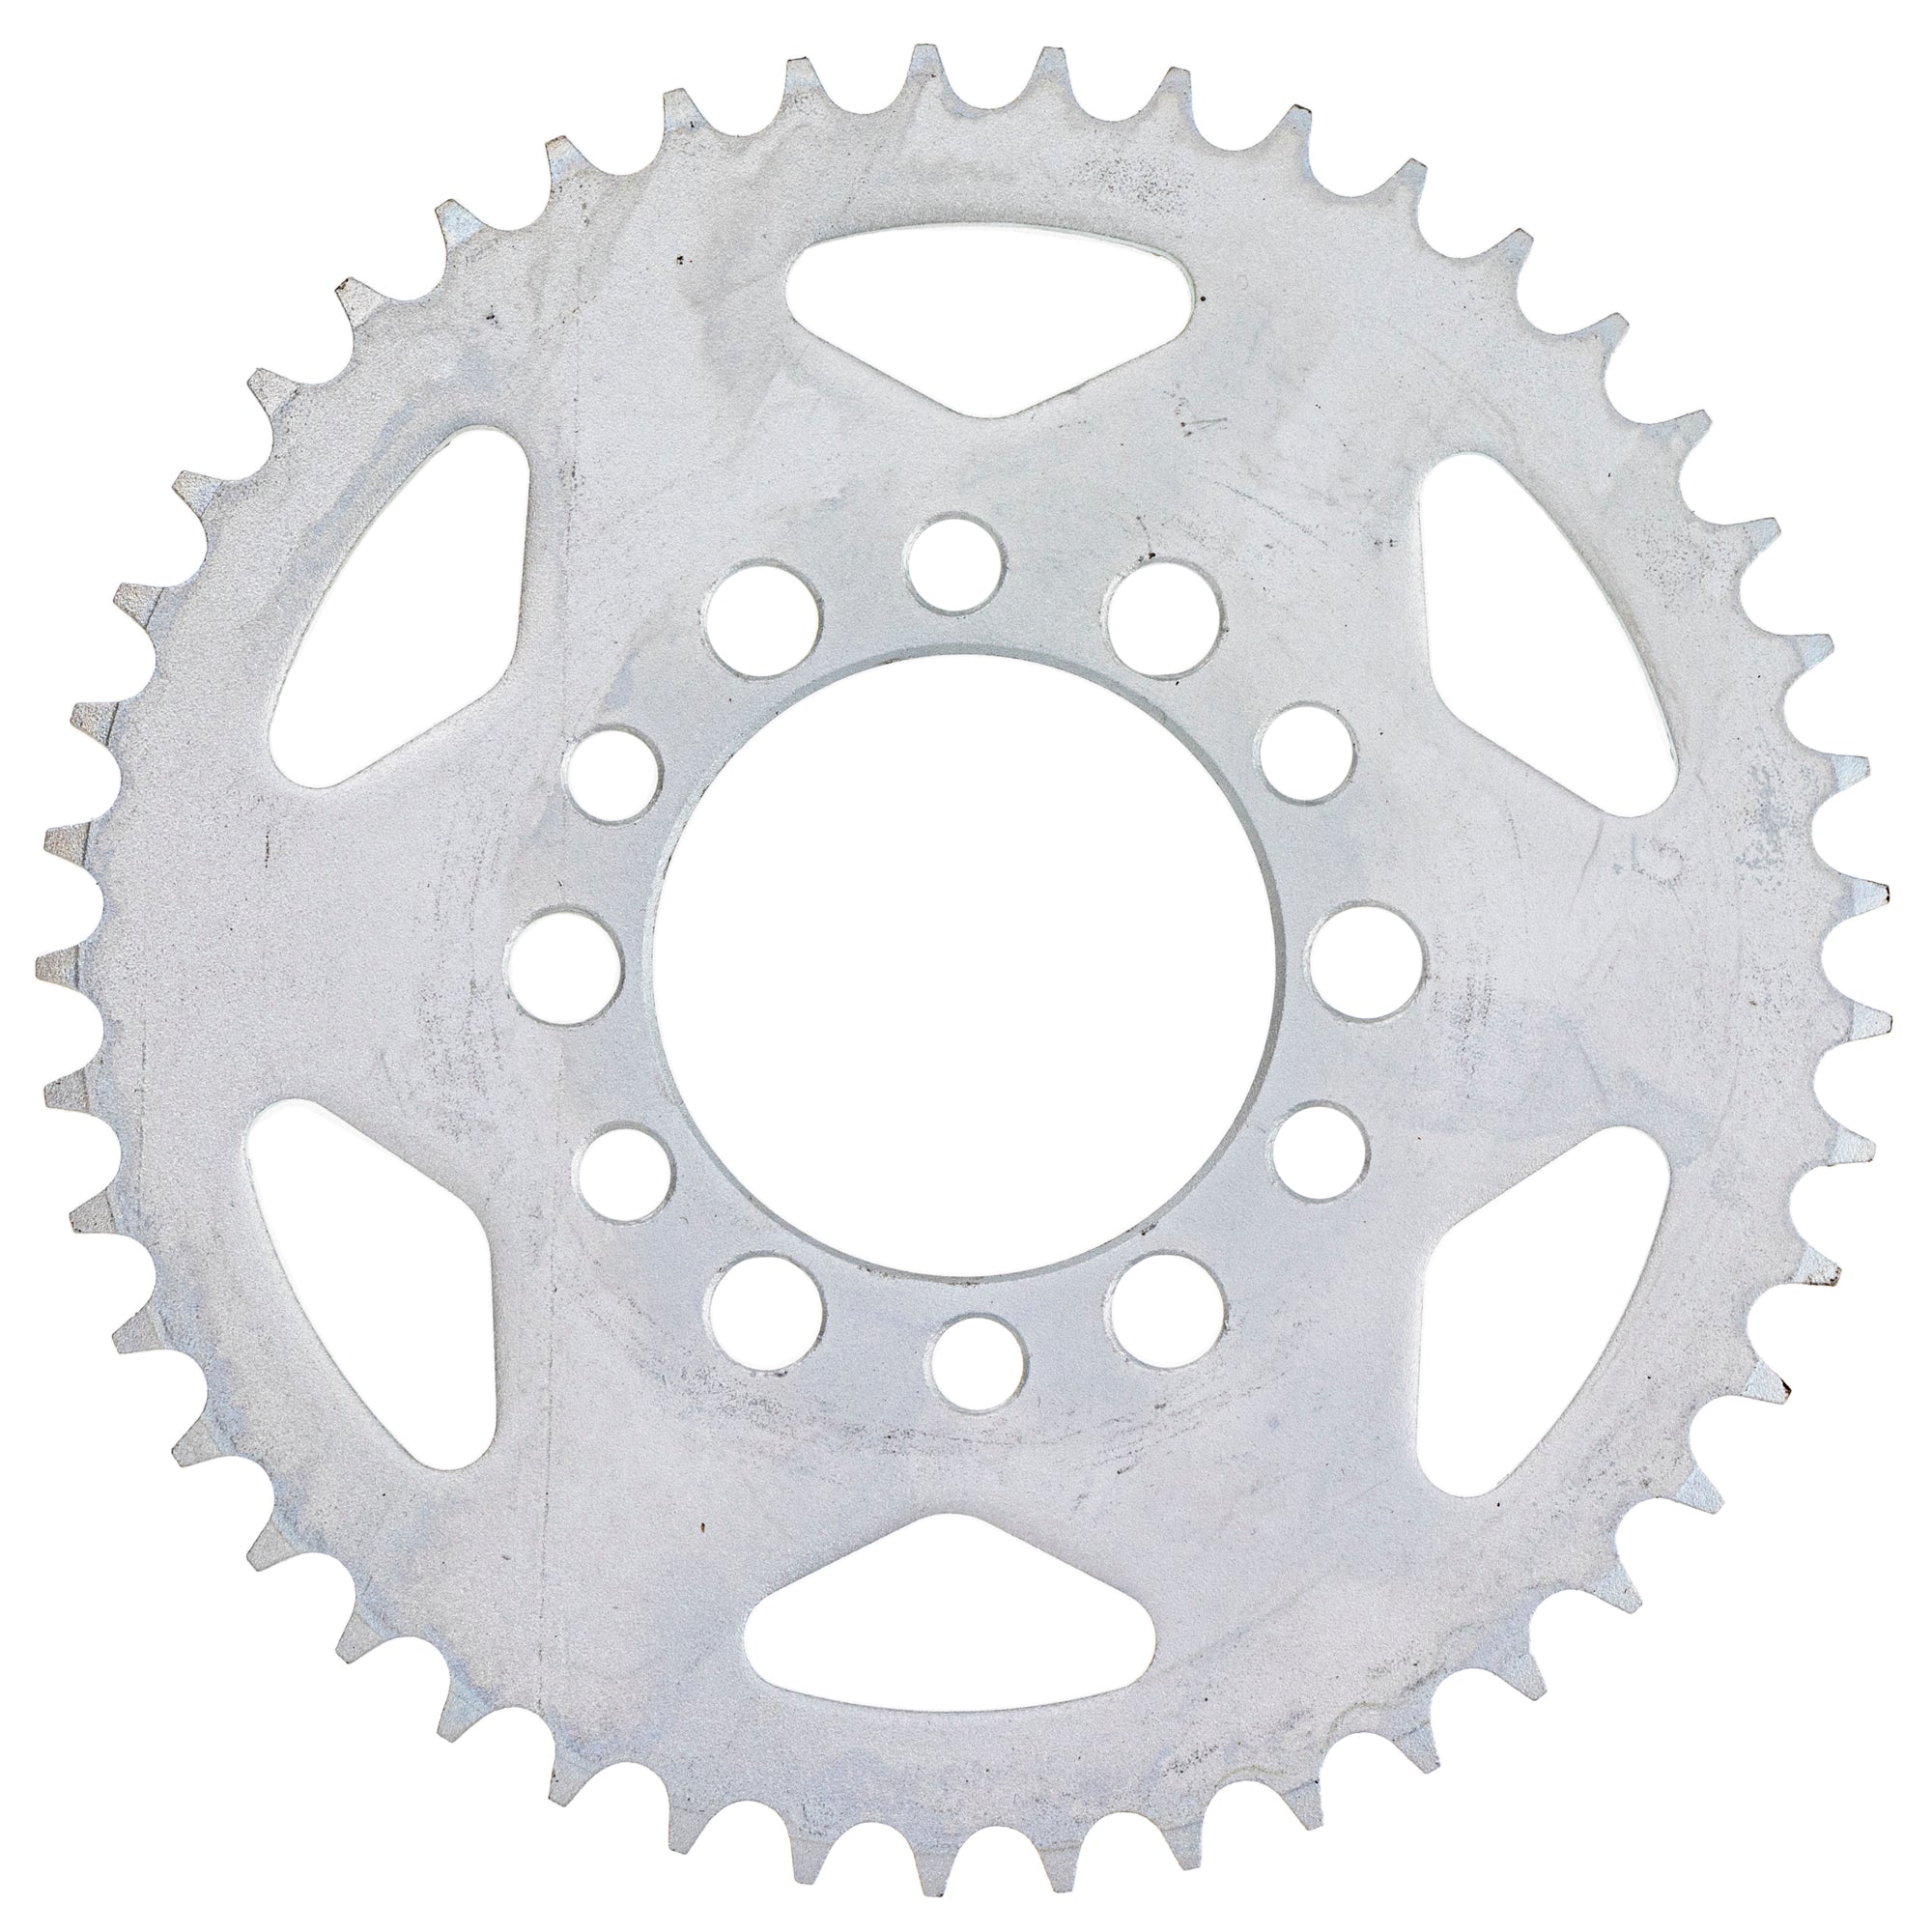 428 Pitch Front 16T Rear 45T Drive Sprocket Kit for Yamaha DT175